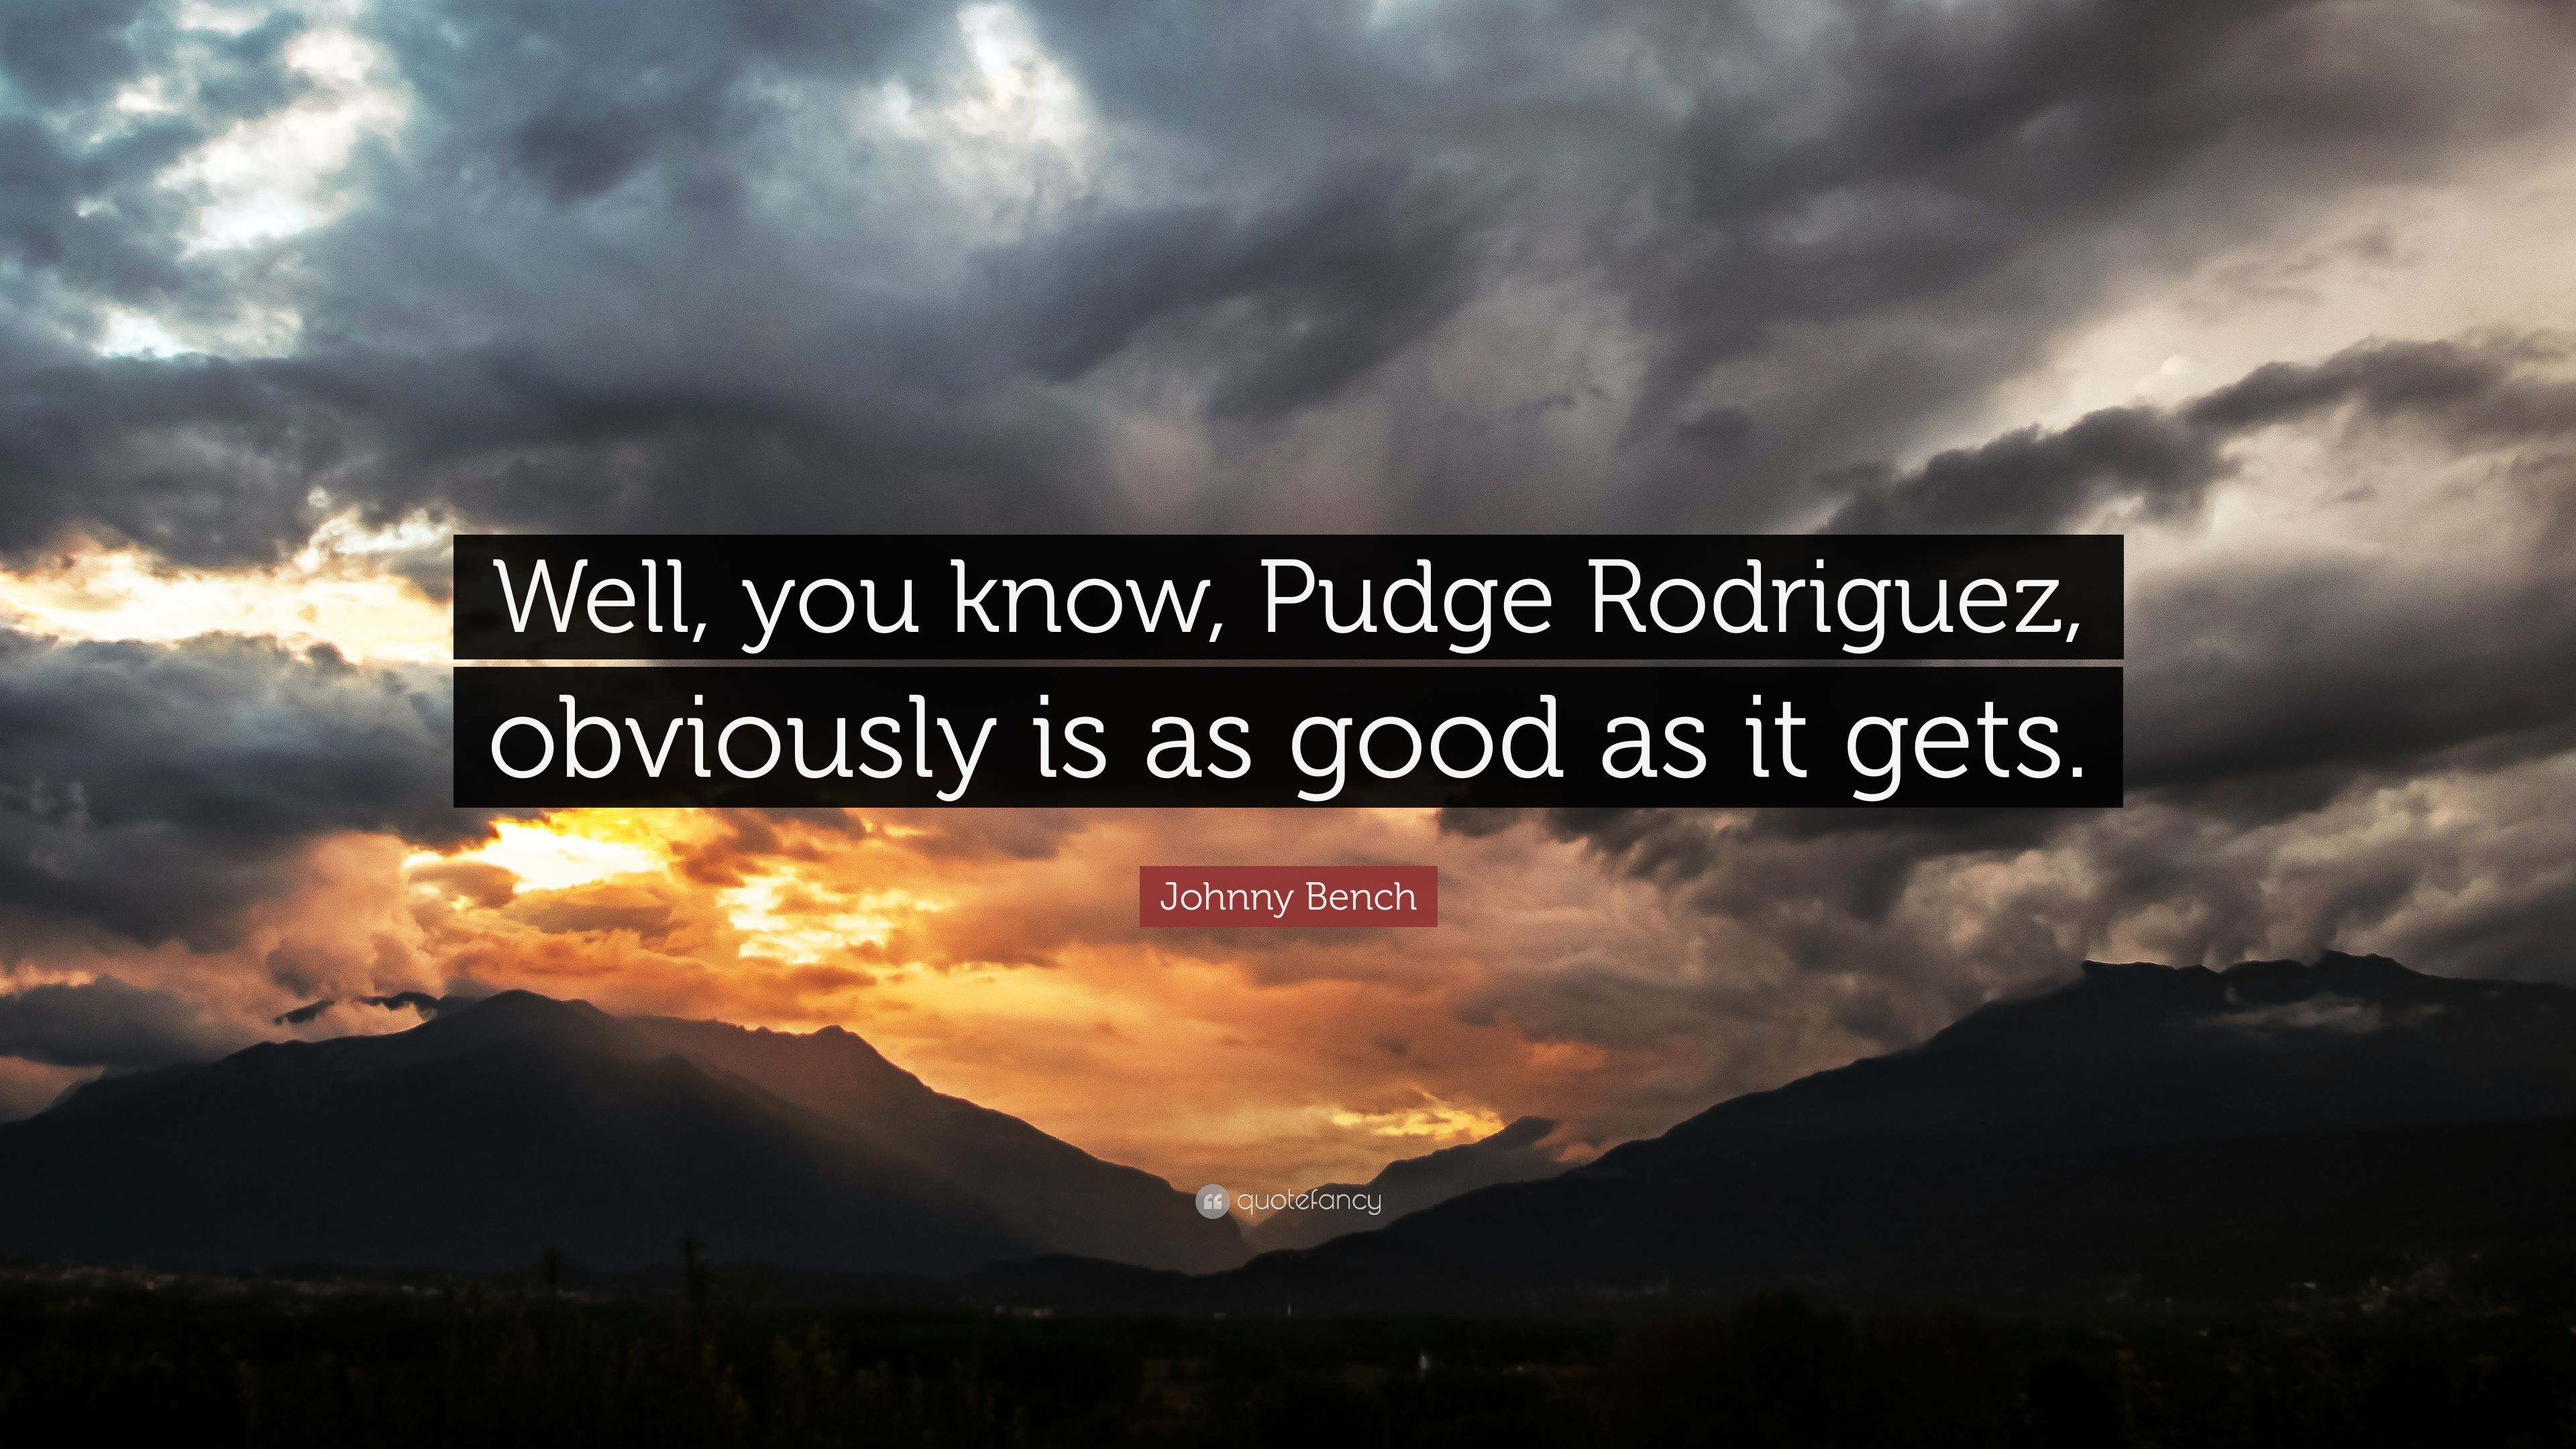 Johnny Bench Quote: “Well, you know, Pudge Rodriguez, obviously is